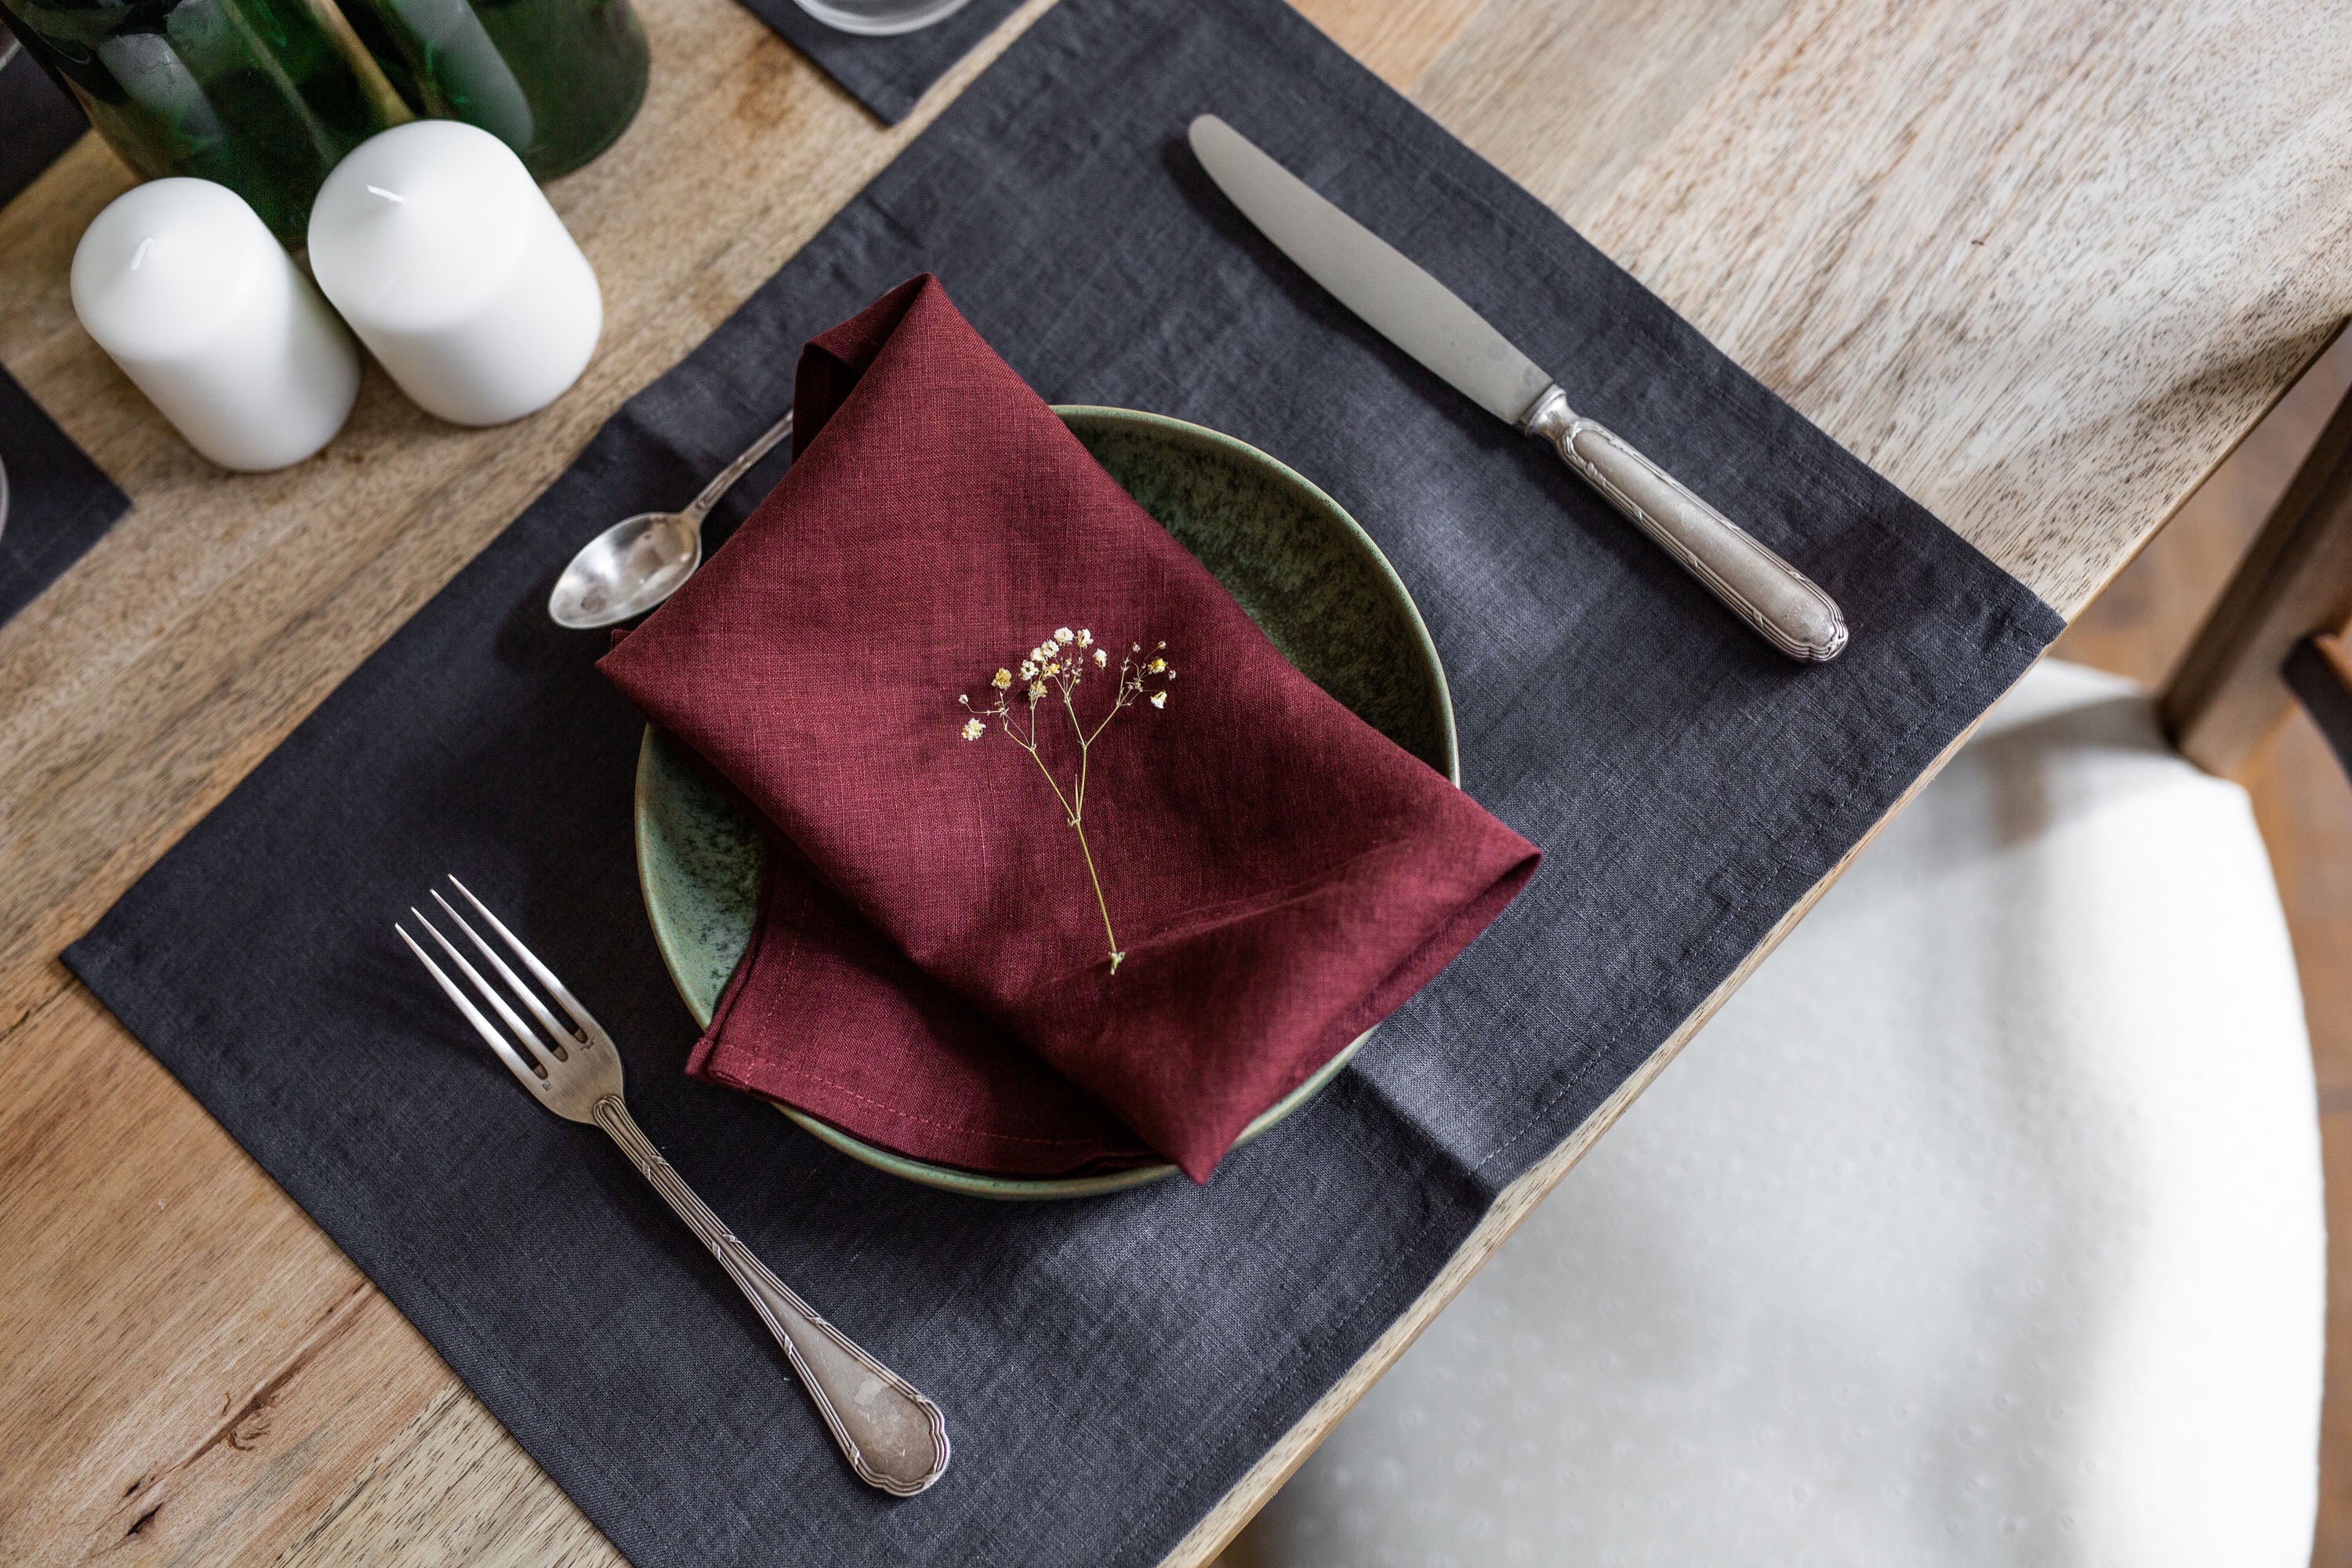 Set Dinner Table With A Charcoal Linen Placement By AmourlInen